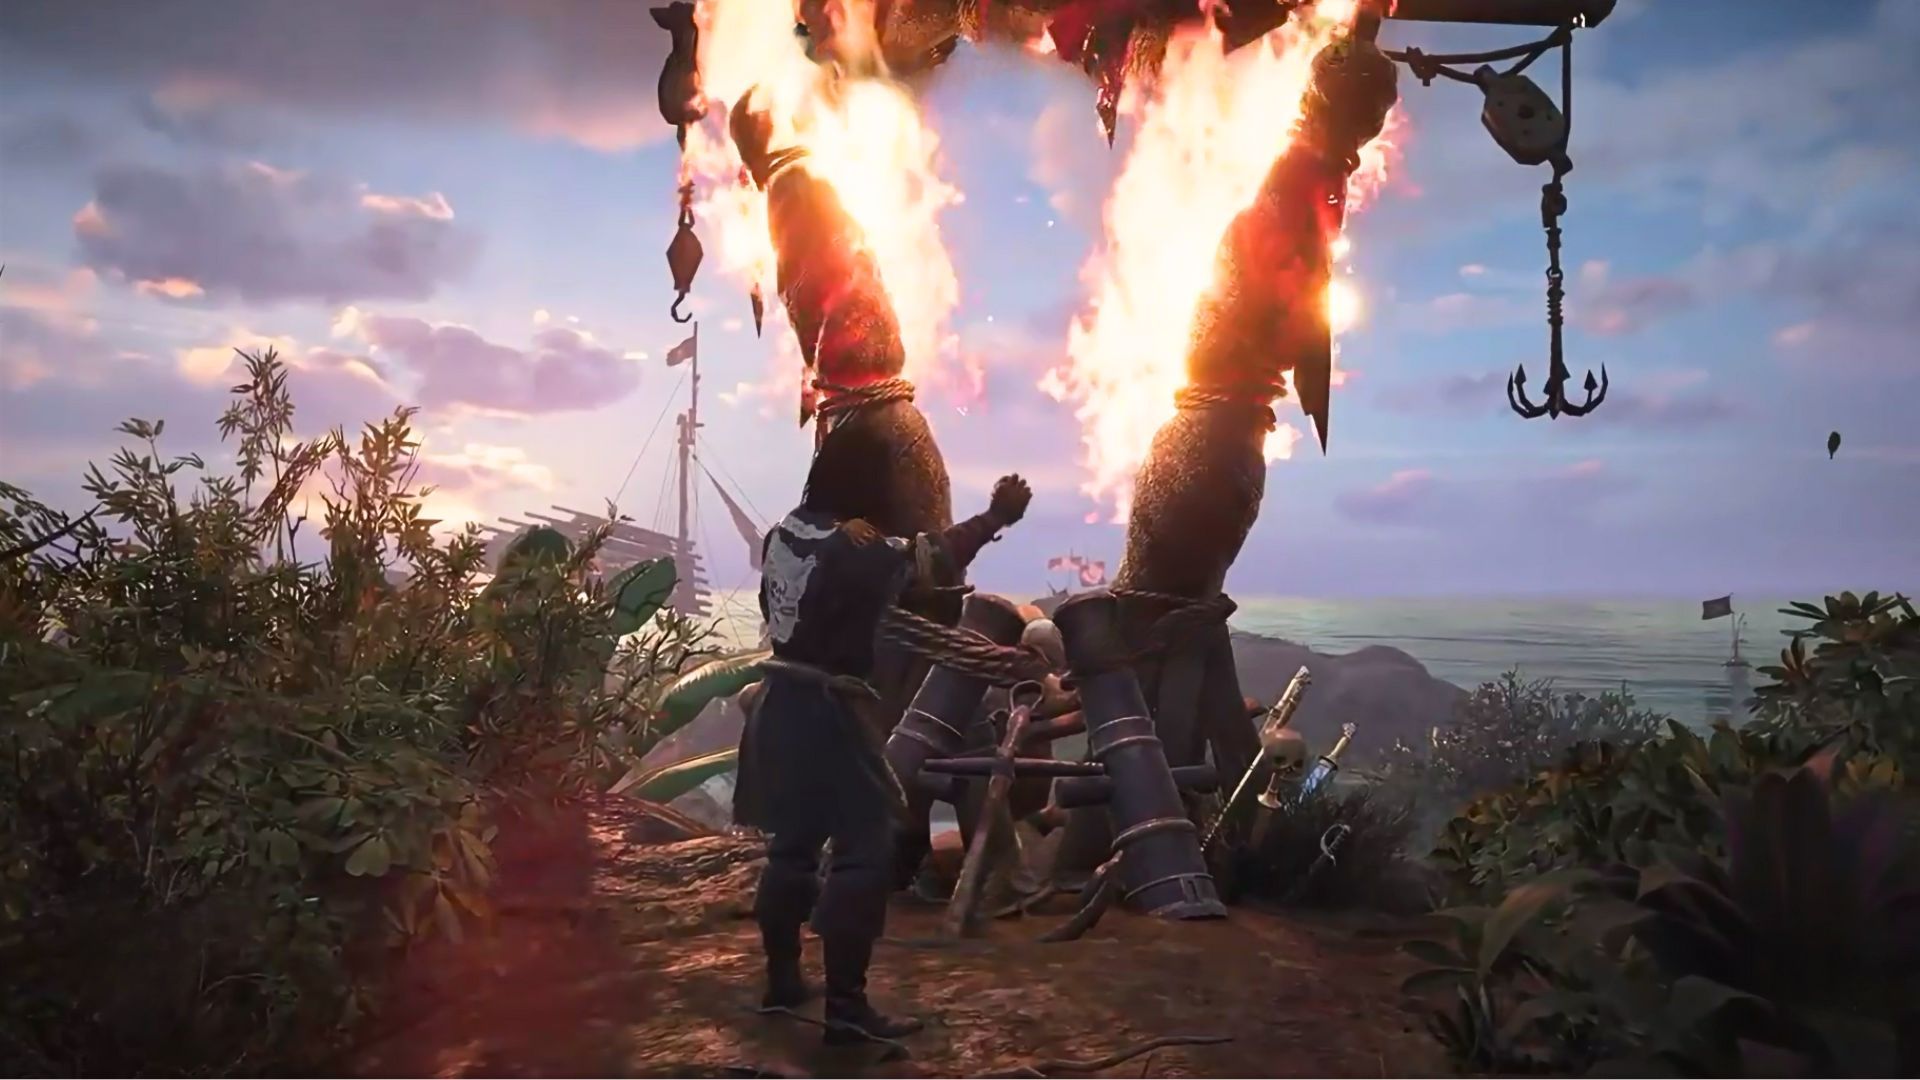 A player throwing powder on a Pirate's Bonfire in Skull and Bones